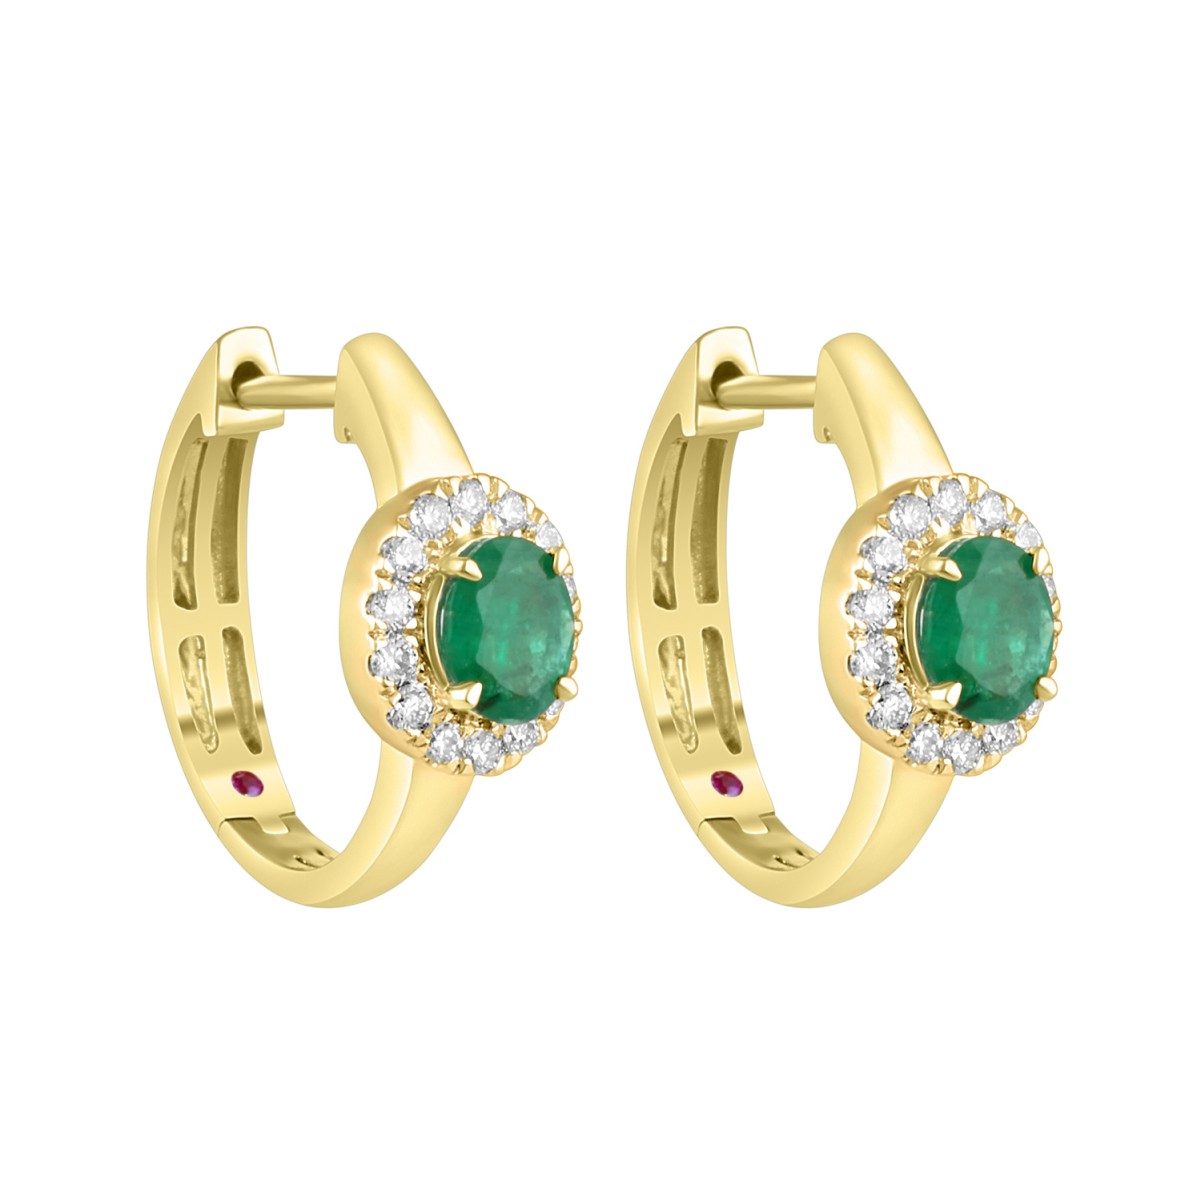 18K YELLOW GOLD 1 1/4CT ROUND/OVAL DIAMOND LADIES HOOPS EARRINGS(COLOR STONE OVAL GREEN EMERALD DIAMOND 1/2CT)